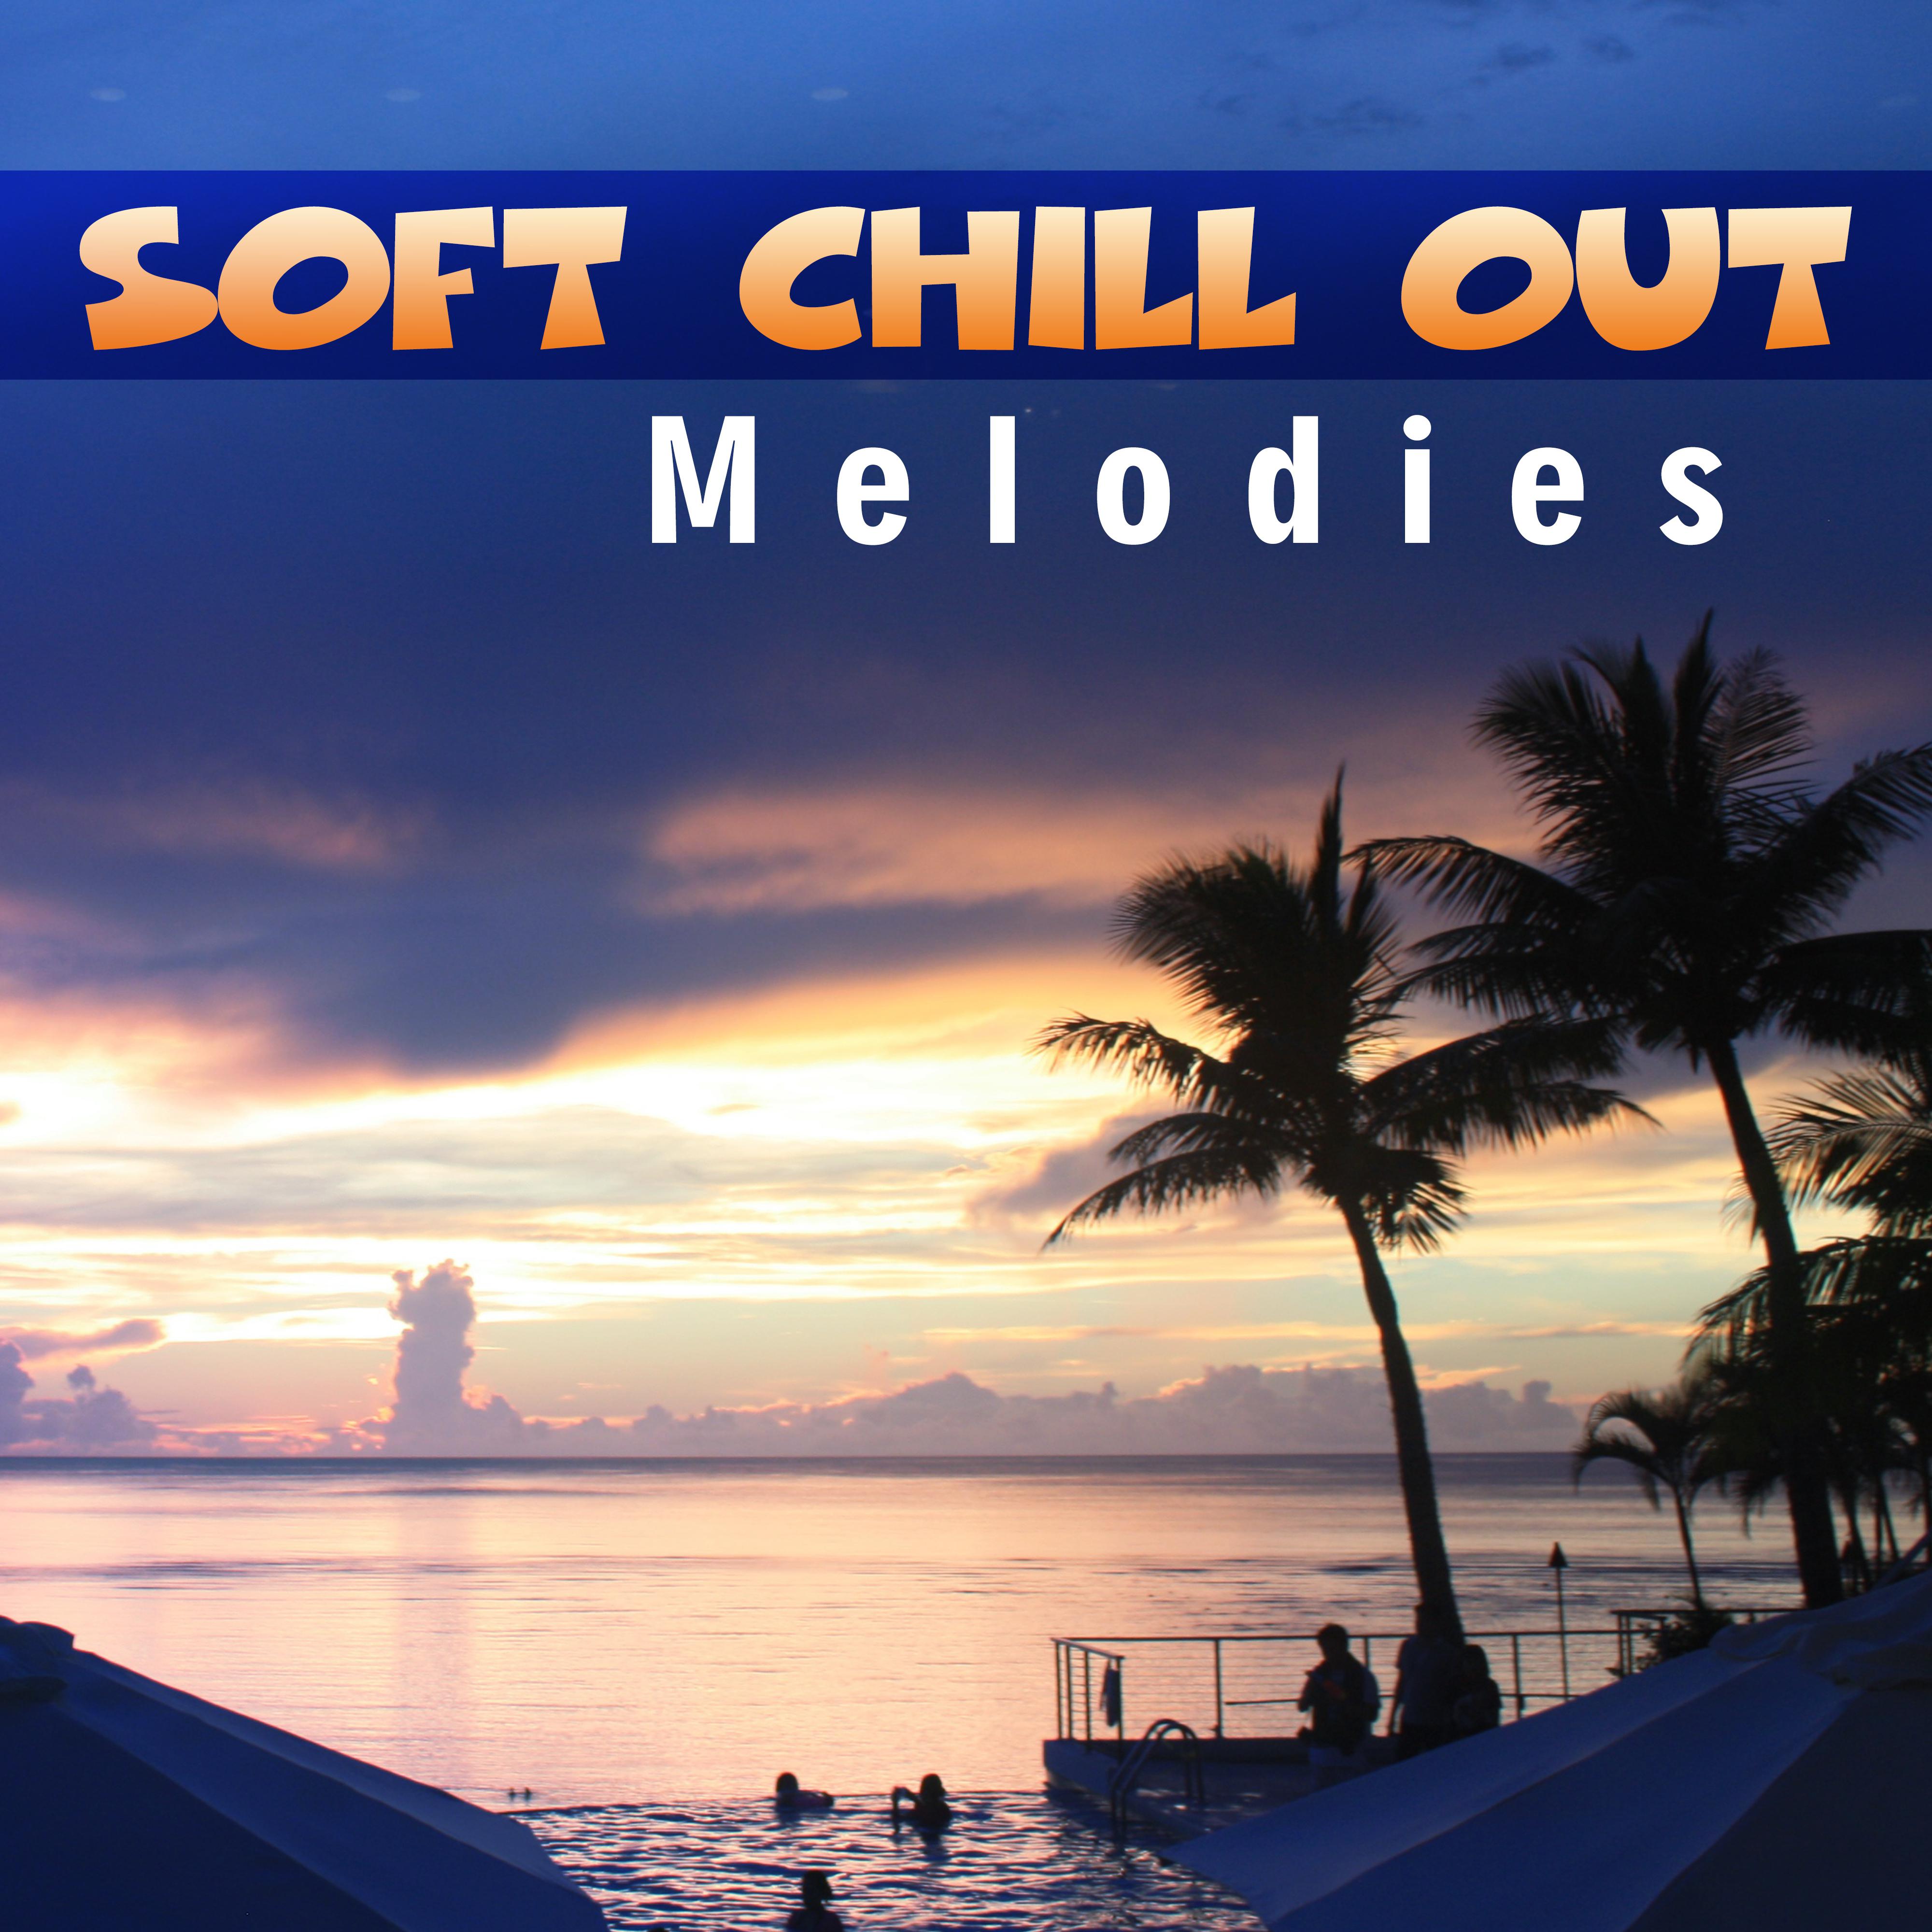 Soft Chill Out Melodies – Easy Listening, Stress Relief, Chill Out Sounds, Music to Relax